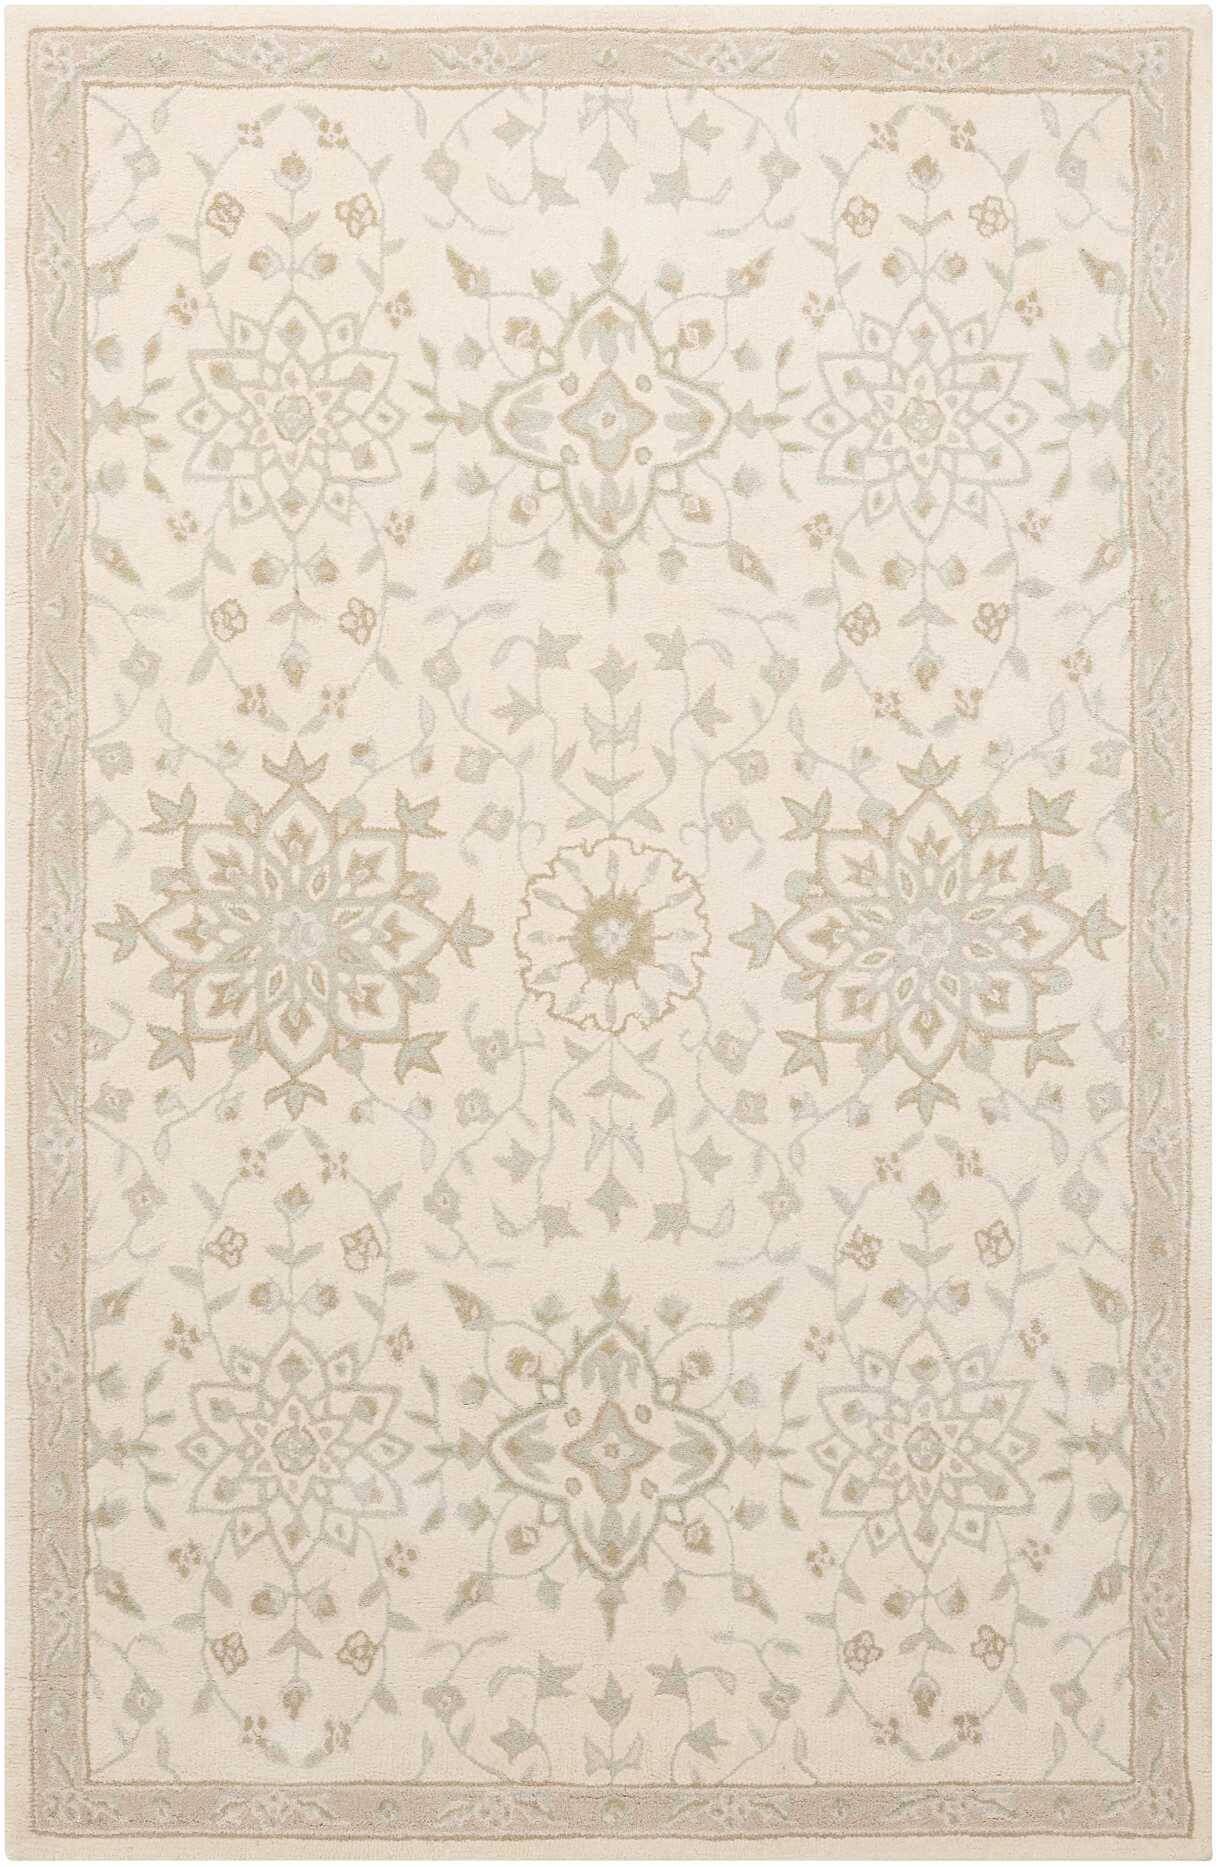 Nourison Royal Serenity White Rectangle 5X8 Ft Wool Carpet 99940 | Sku 99940 Throughout White Serenity Rugs (View 14 of 15)